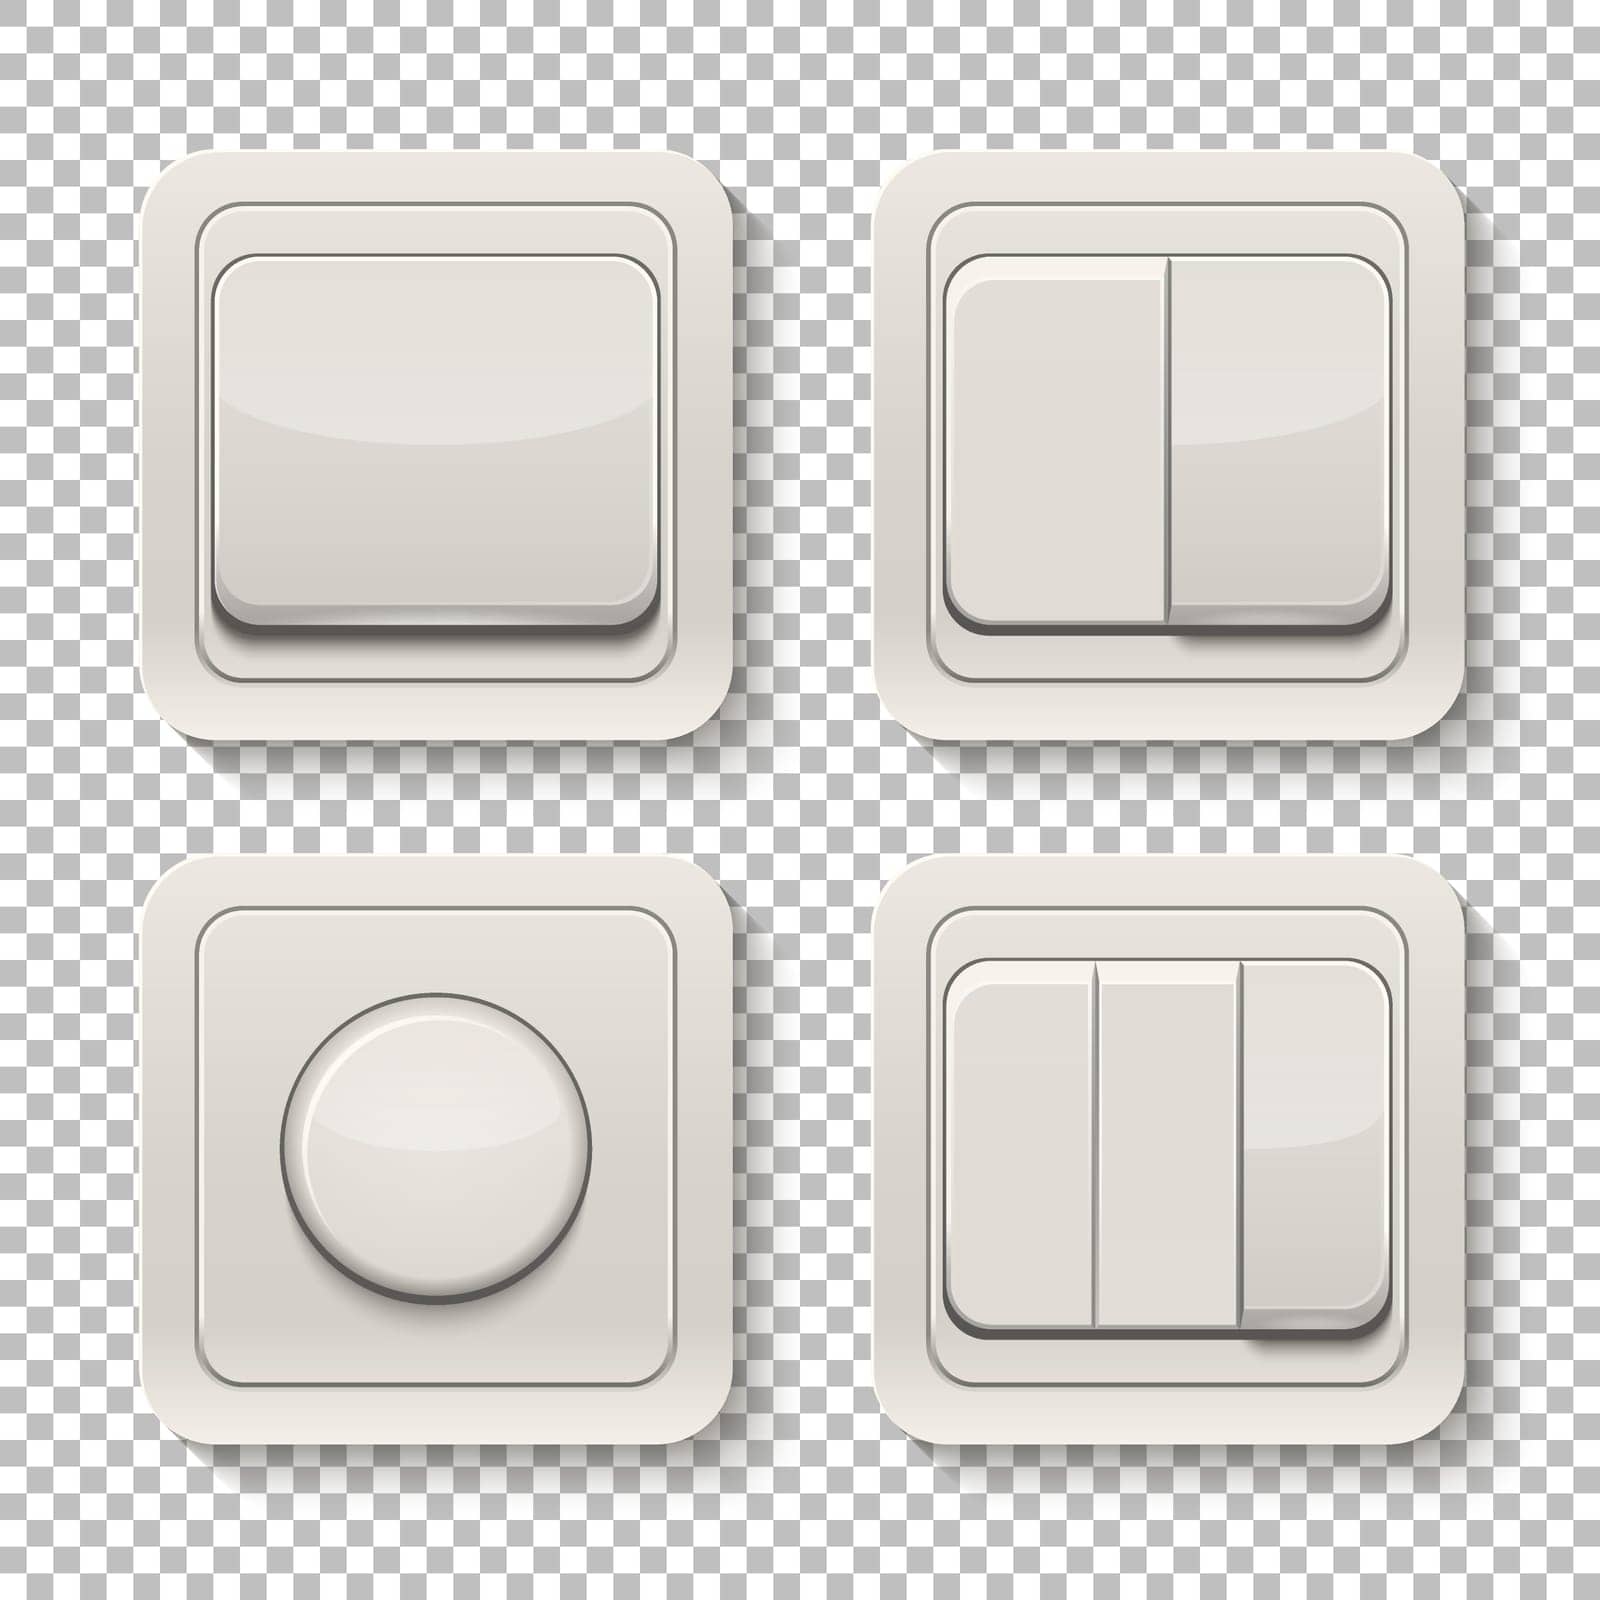 Set of realistic switches isolated on a transparent background. Vector EPS10 illustration.